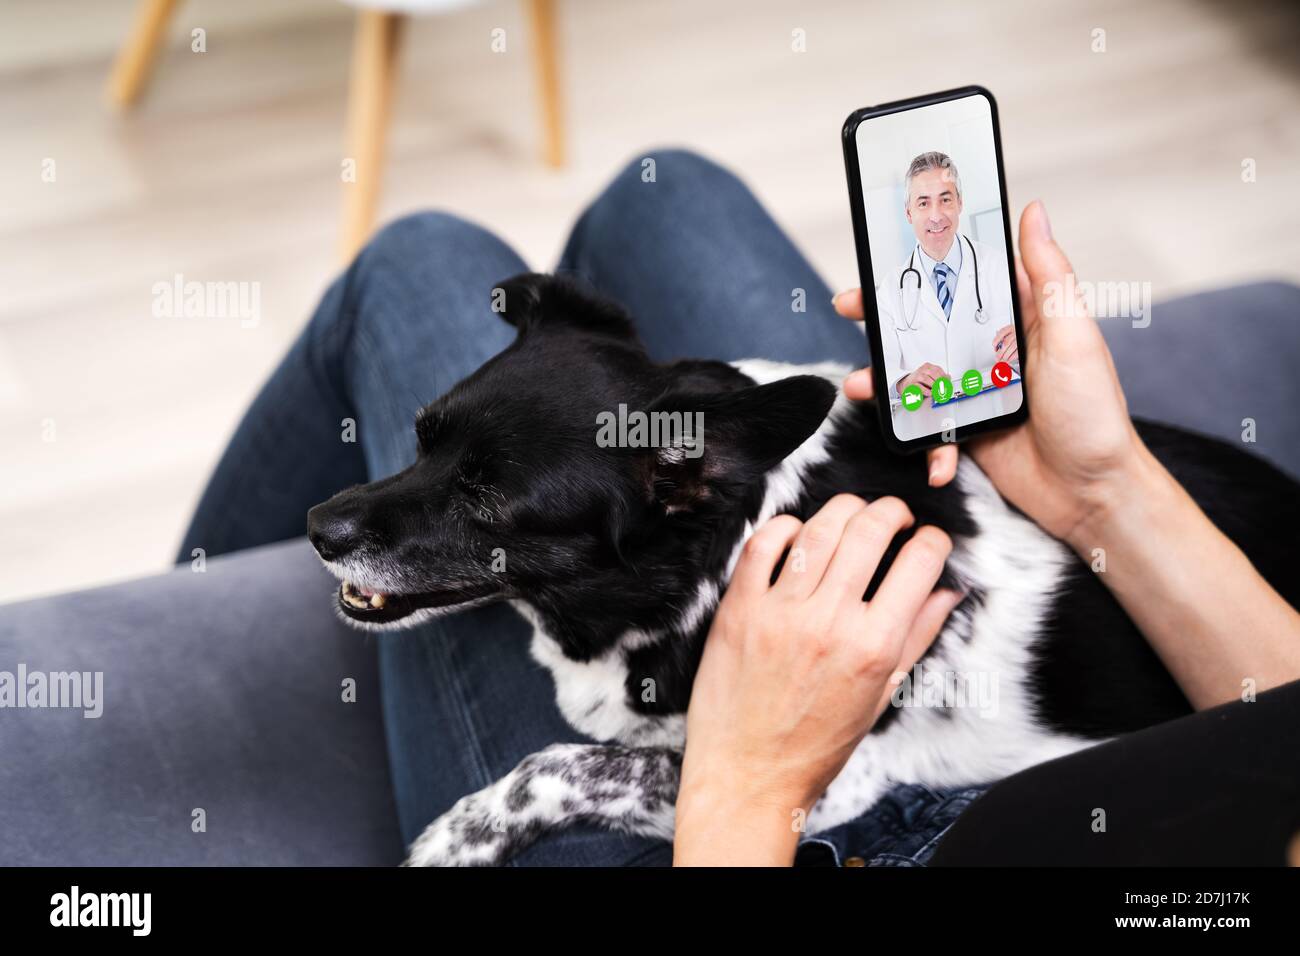 Web Video Conference Call With Doctor On Smartphone Stock Photo